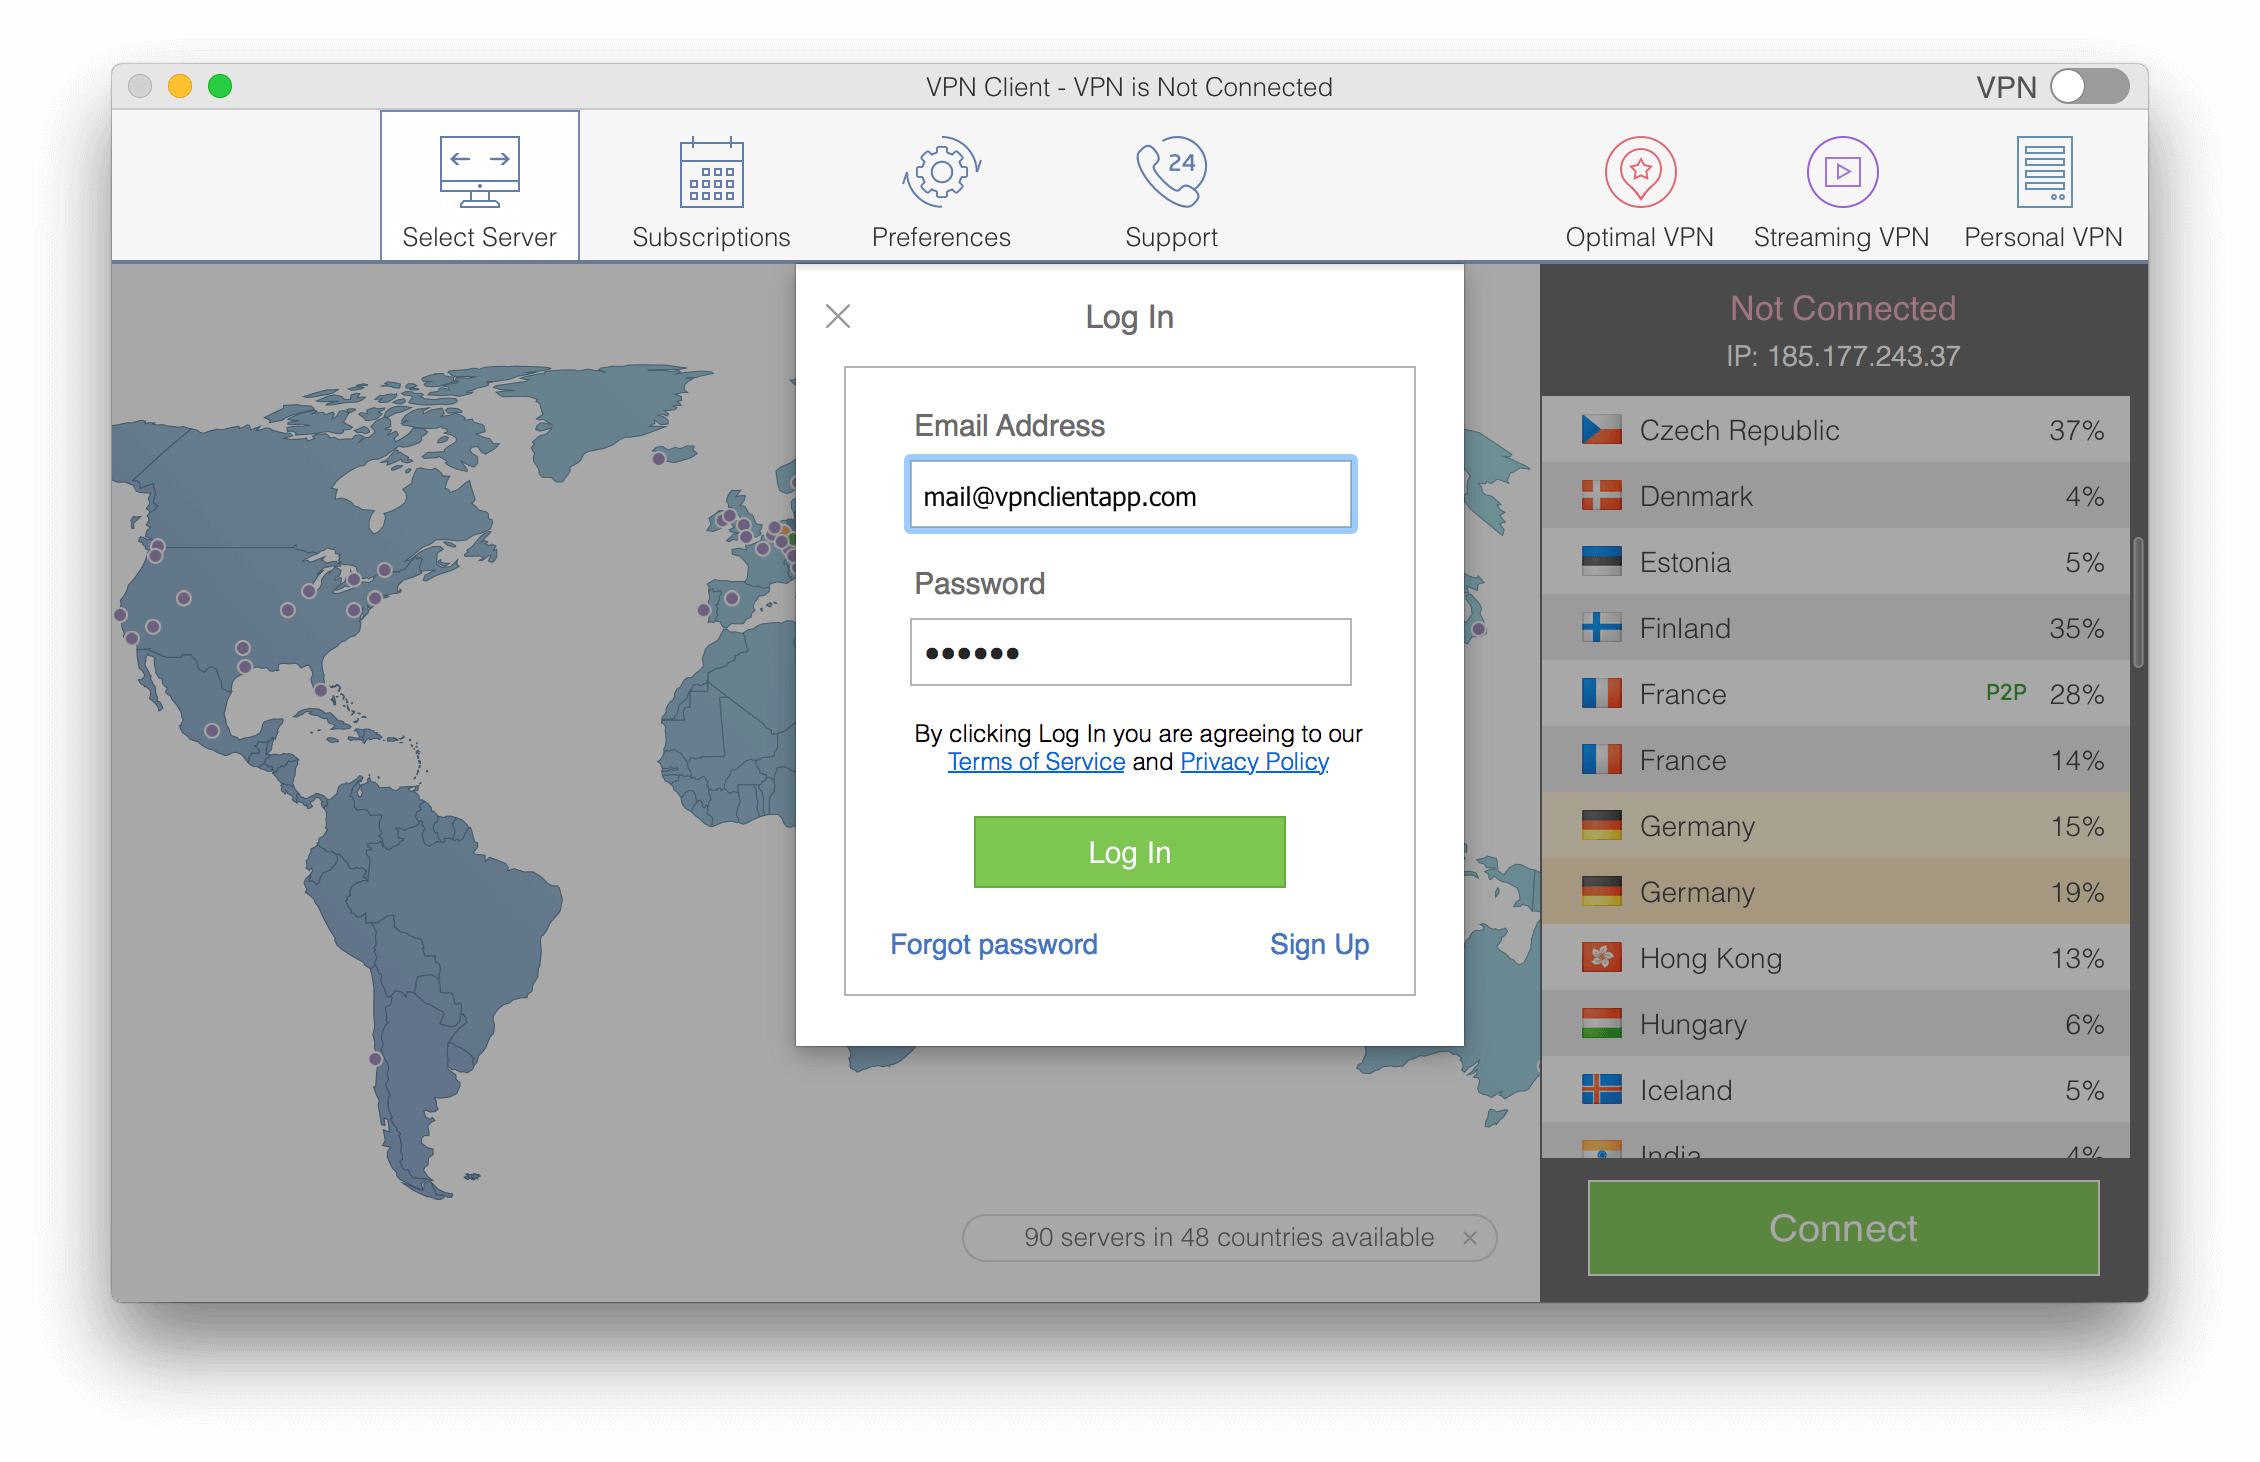 Get started with VPN Client